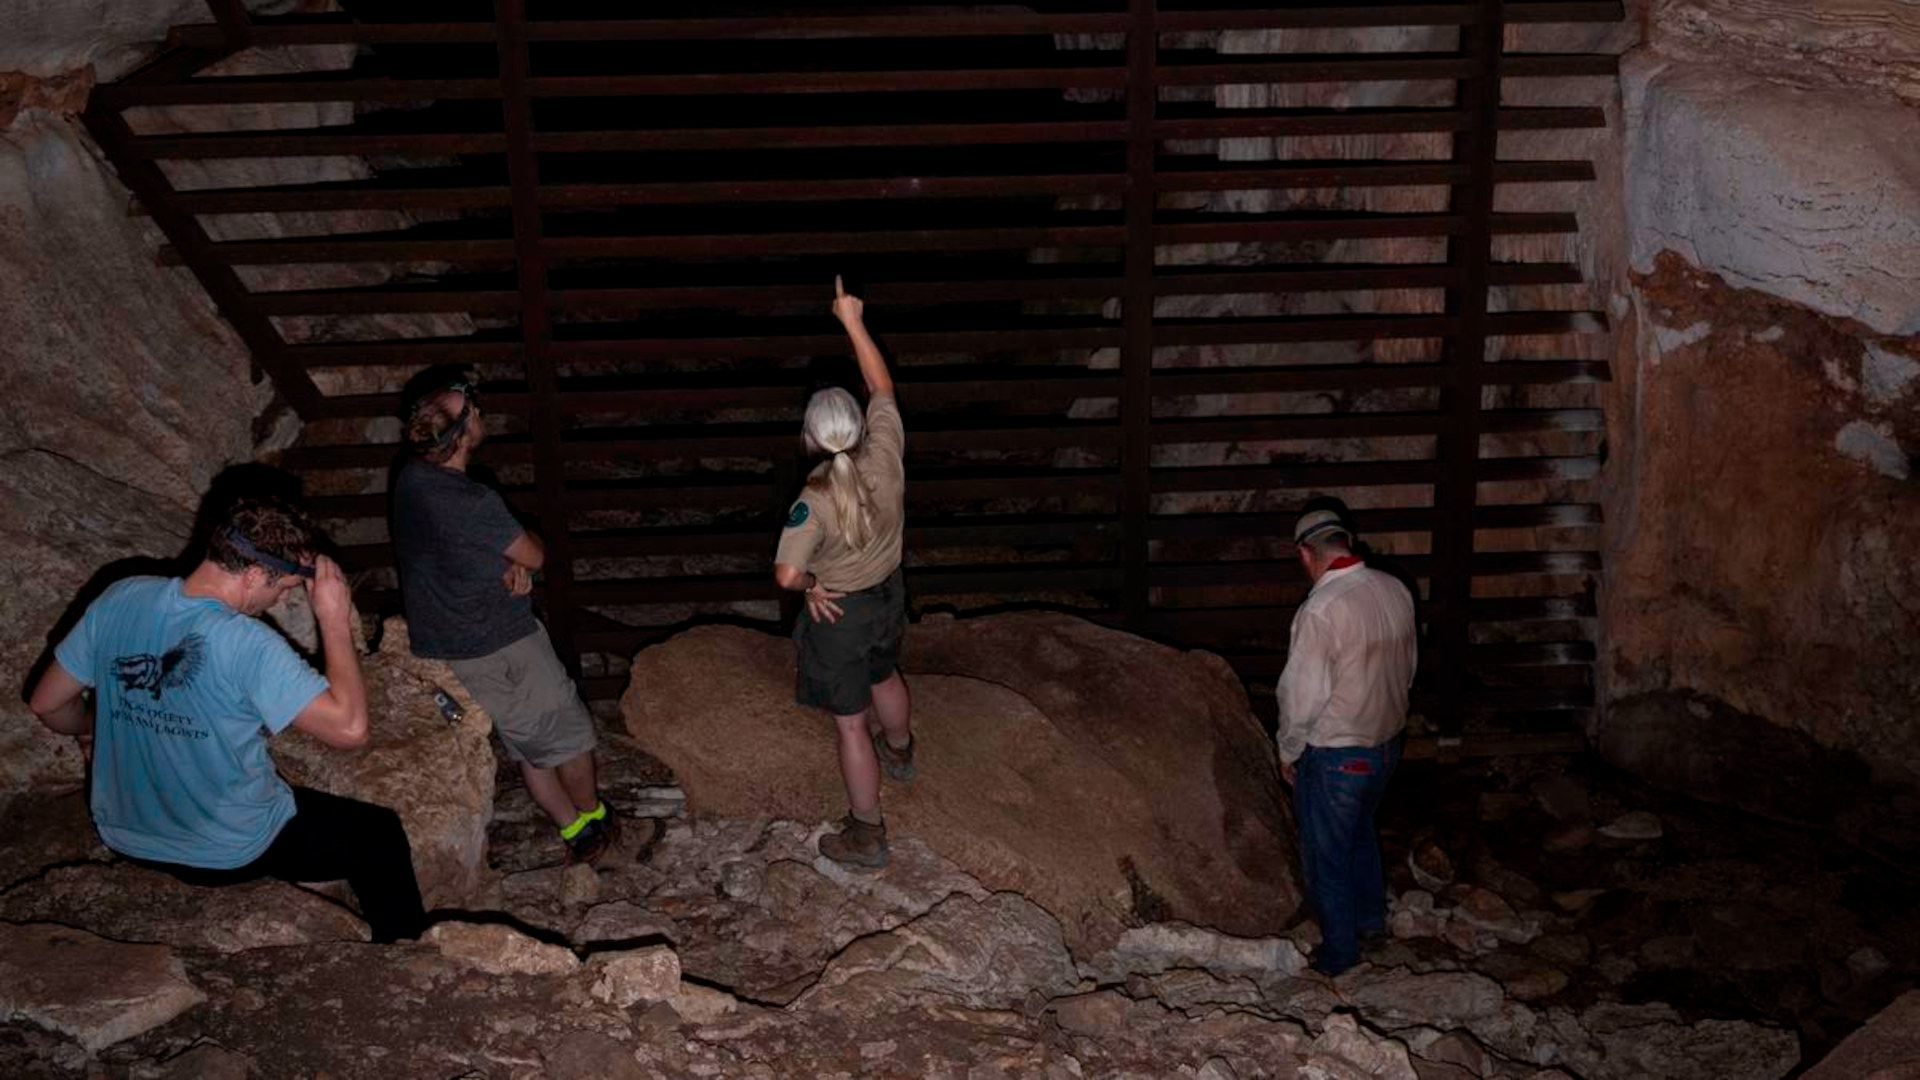 Debbie Hicks, Texas State Park Ranger, second from right, points toward the gate that blocks people from the depths of Gorman Cave during a visit to survey the bat population.